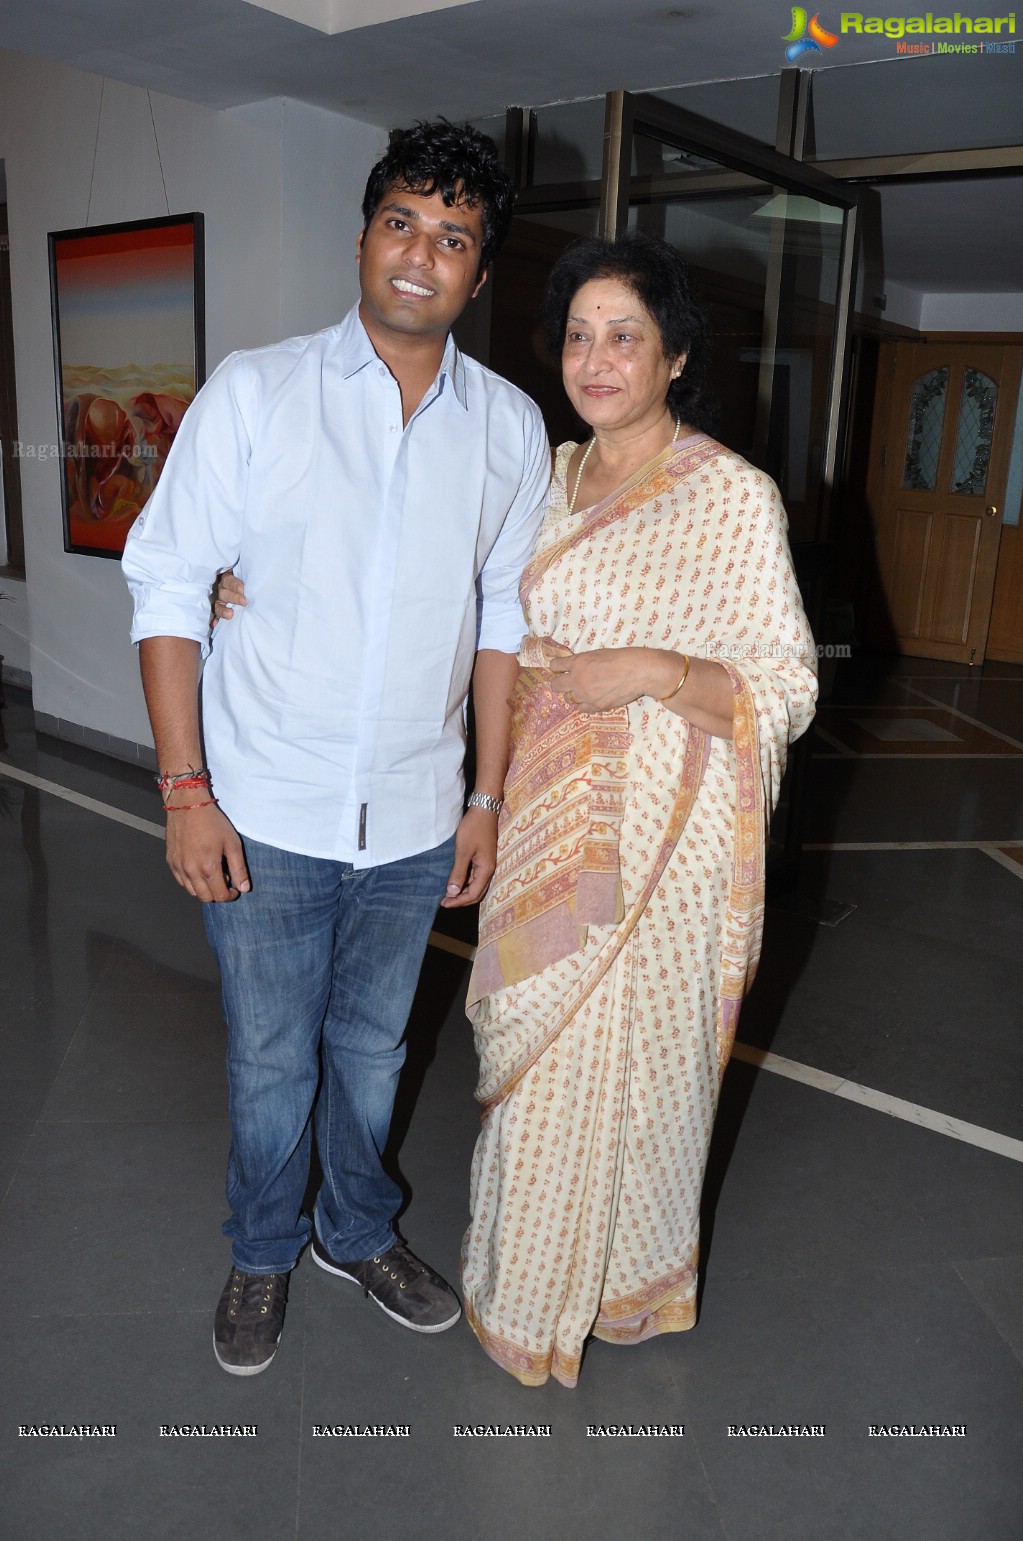 Screening of a Documentary film 'Handle with care' at LV Prasad Eye Institute, Hyderabad